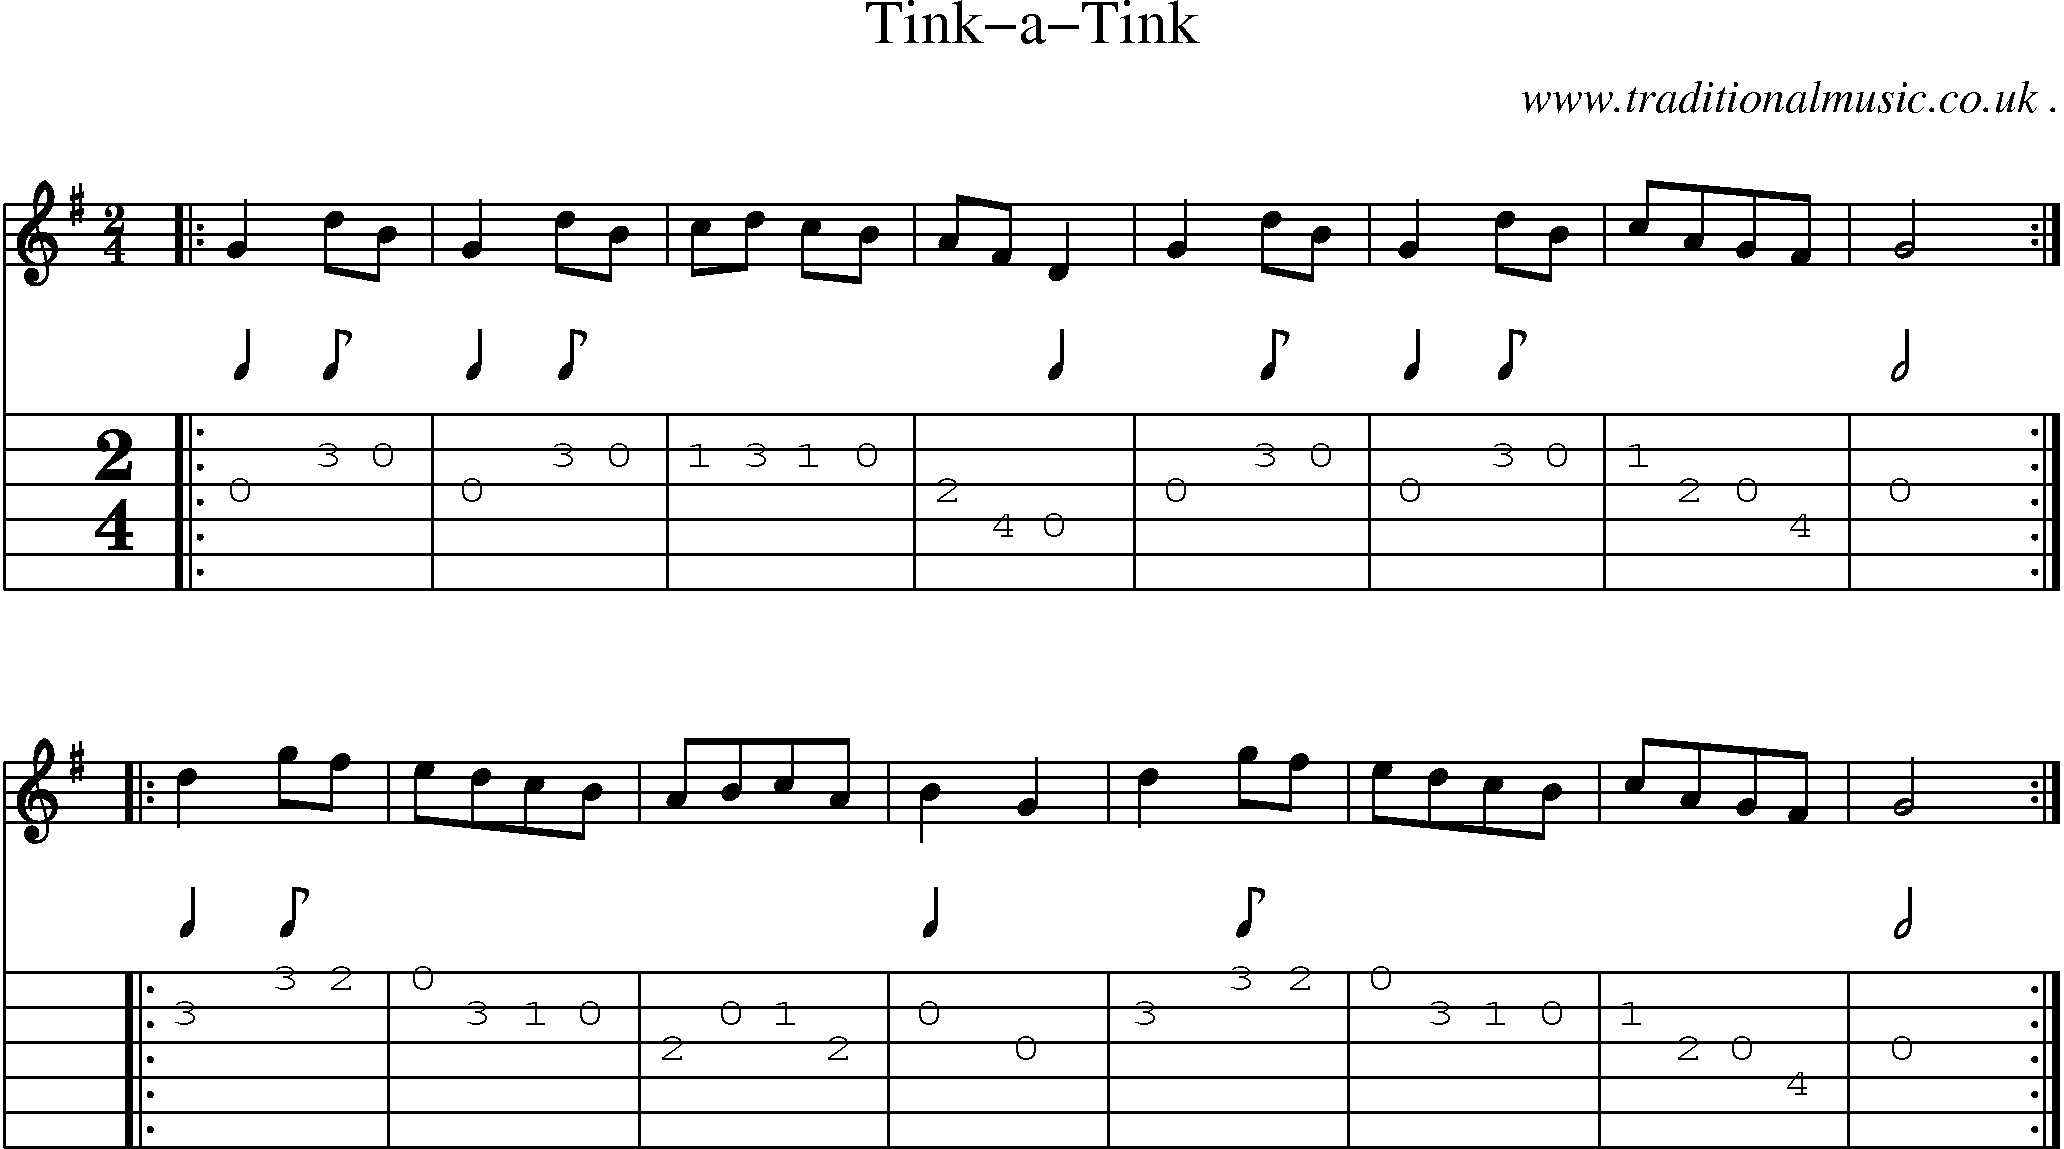 Sheet-Music and Guitar Tabs for Tink-a-tink